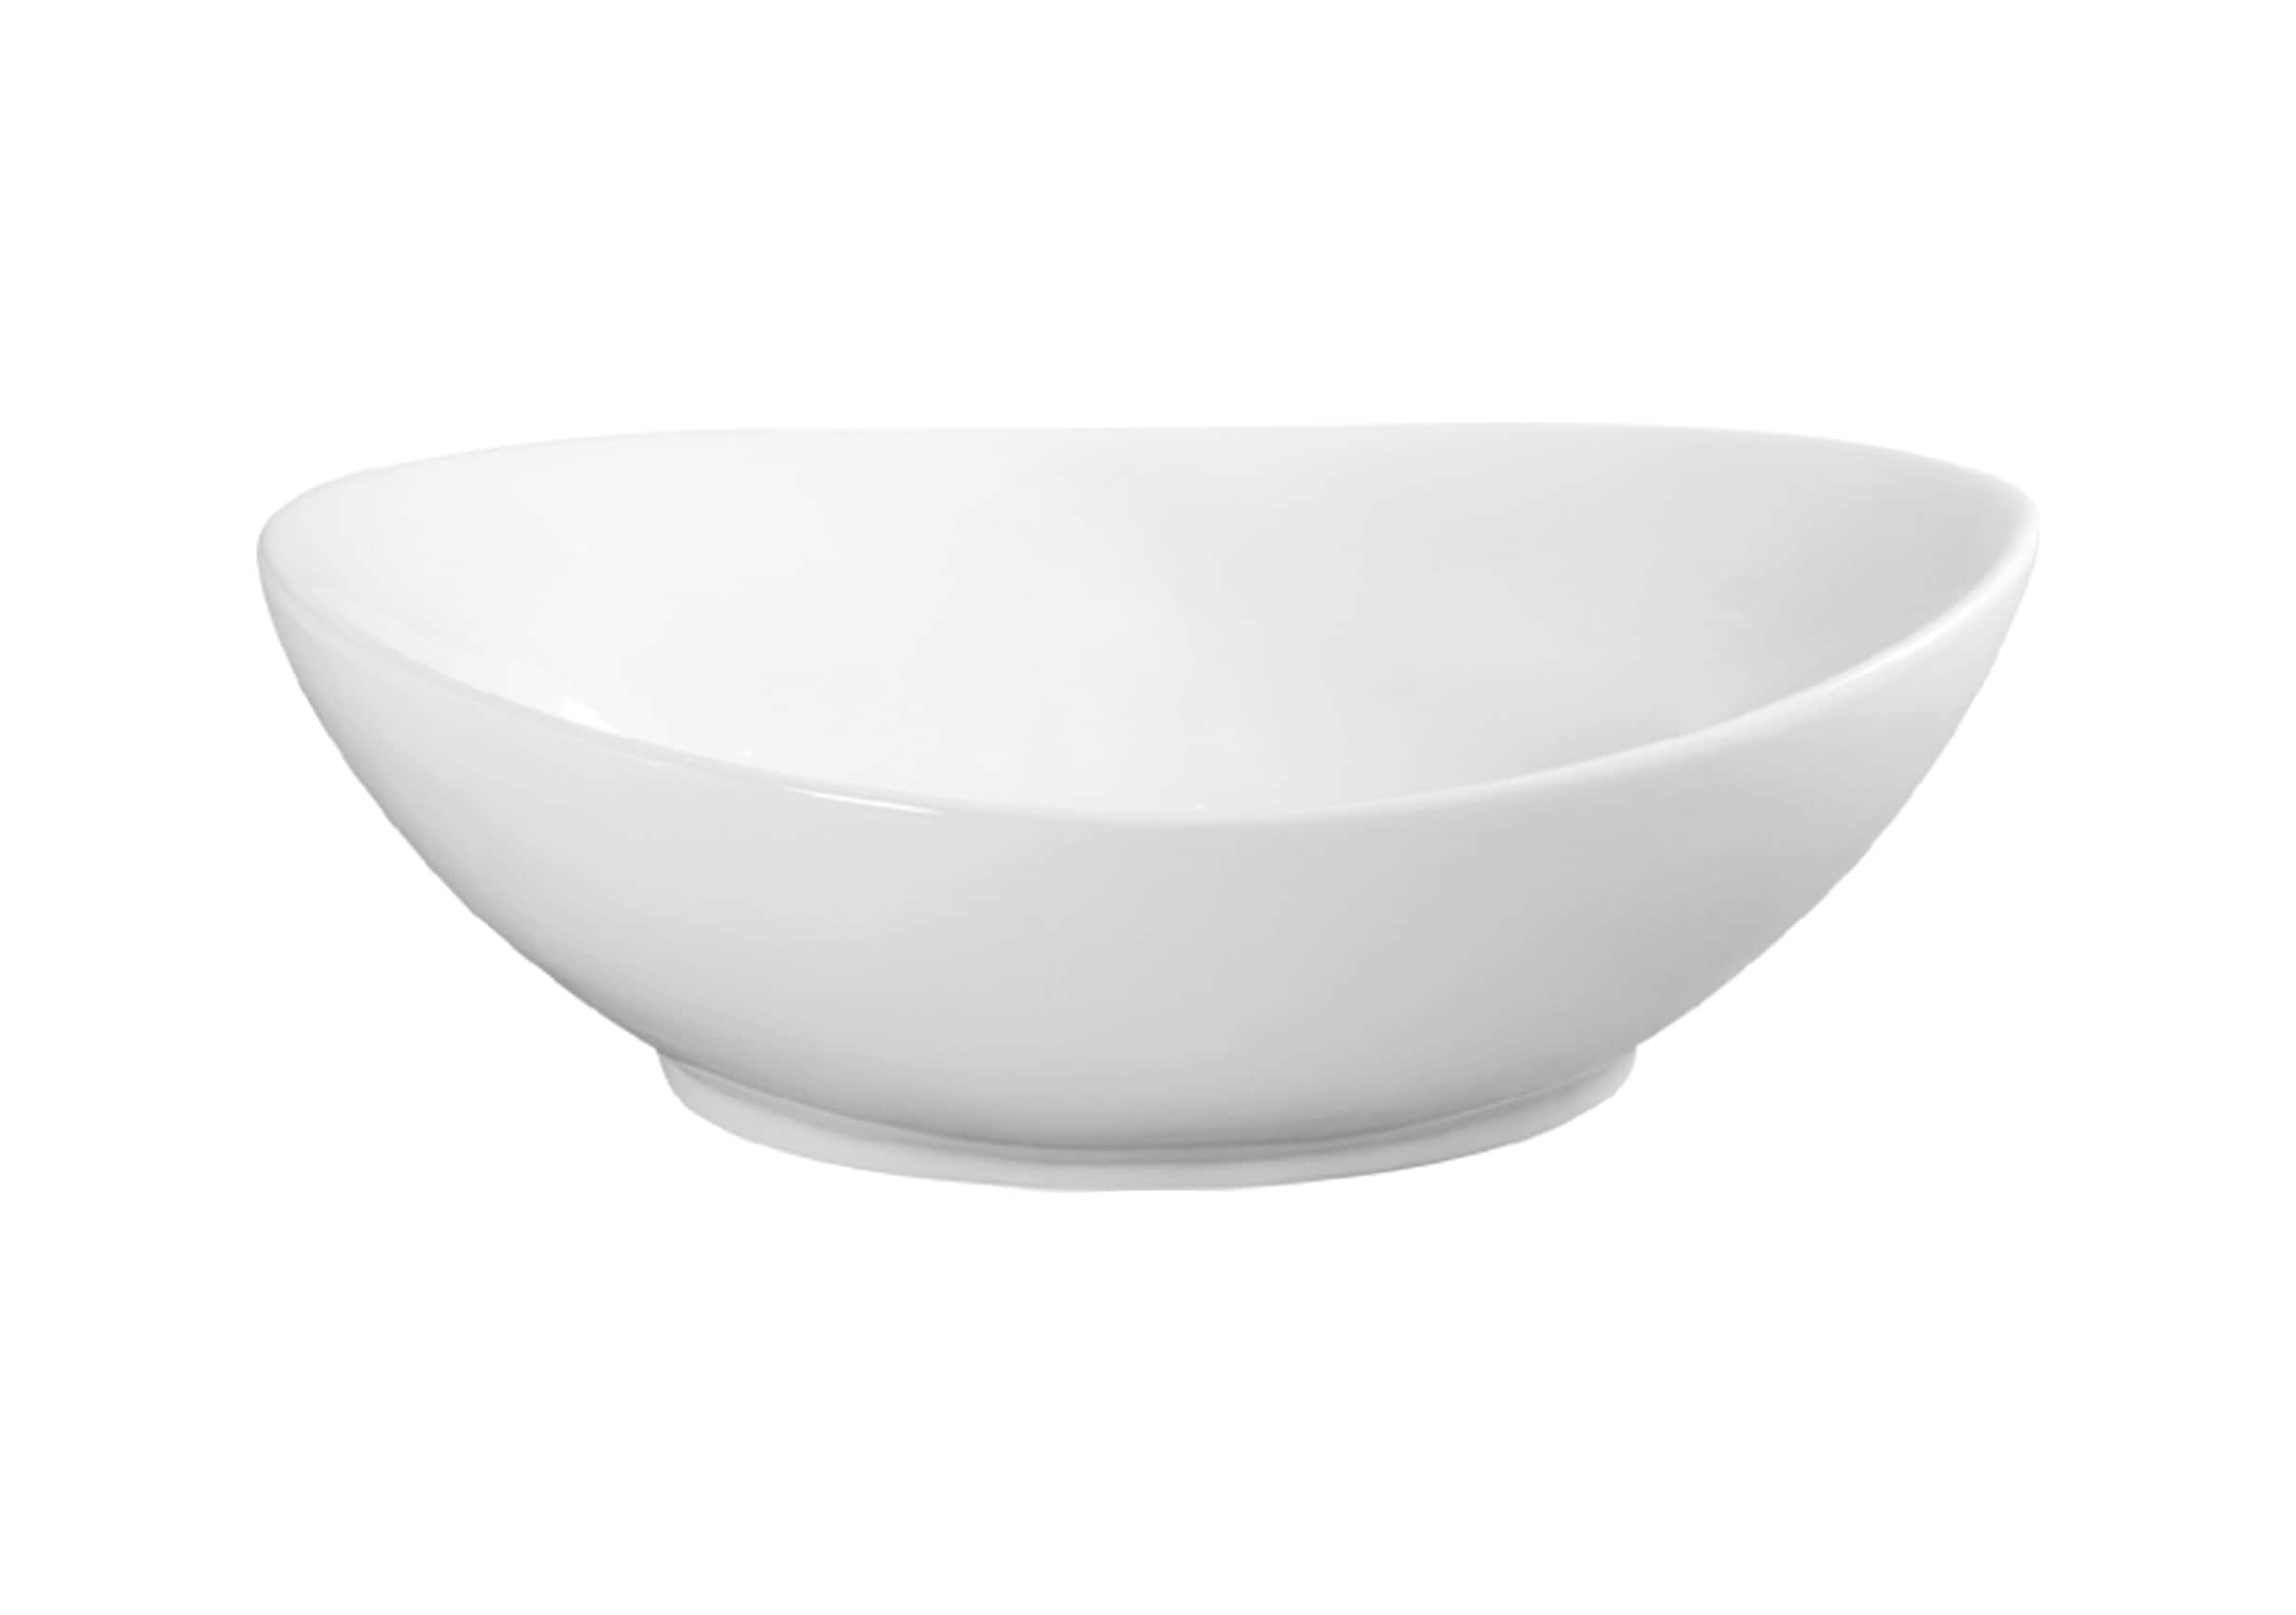 Superior Sinks White Vessel Oval Modern Bathroom Sink (22.63-in x 15-in) at